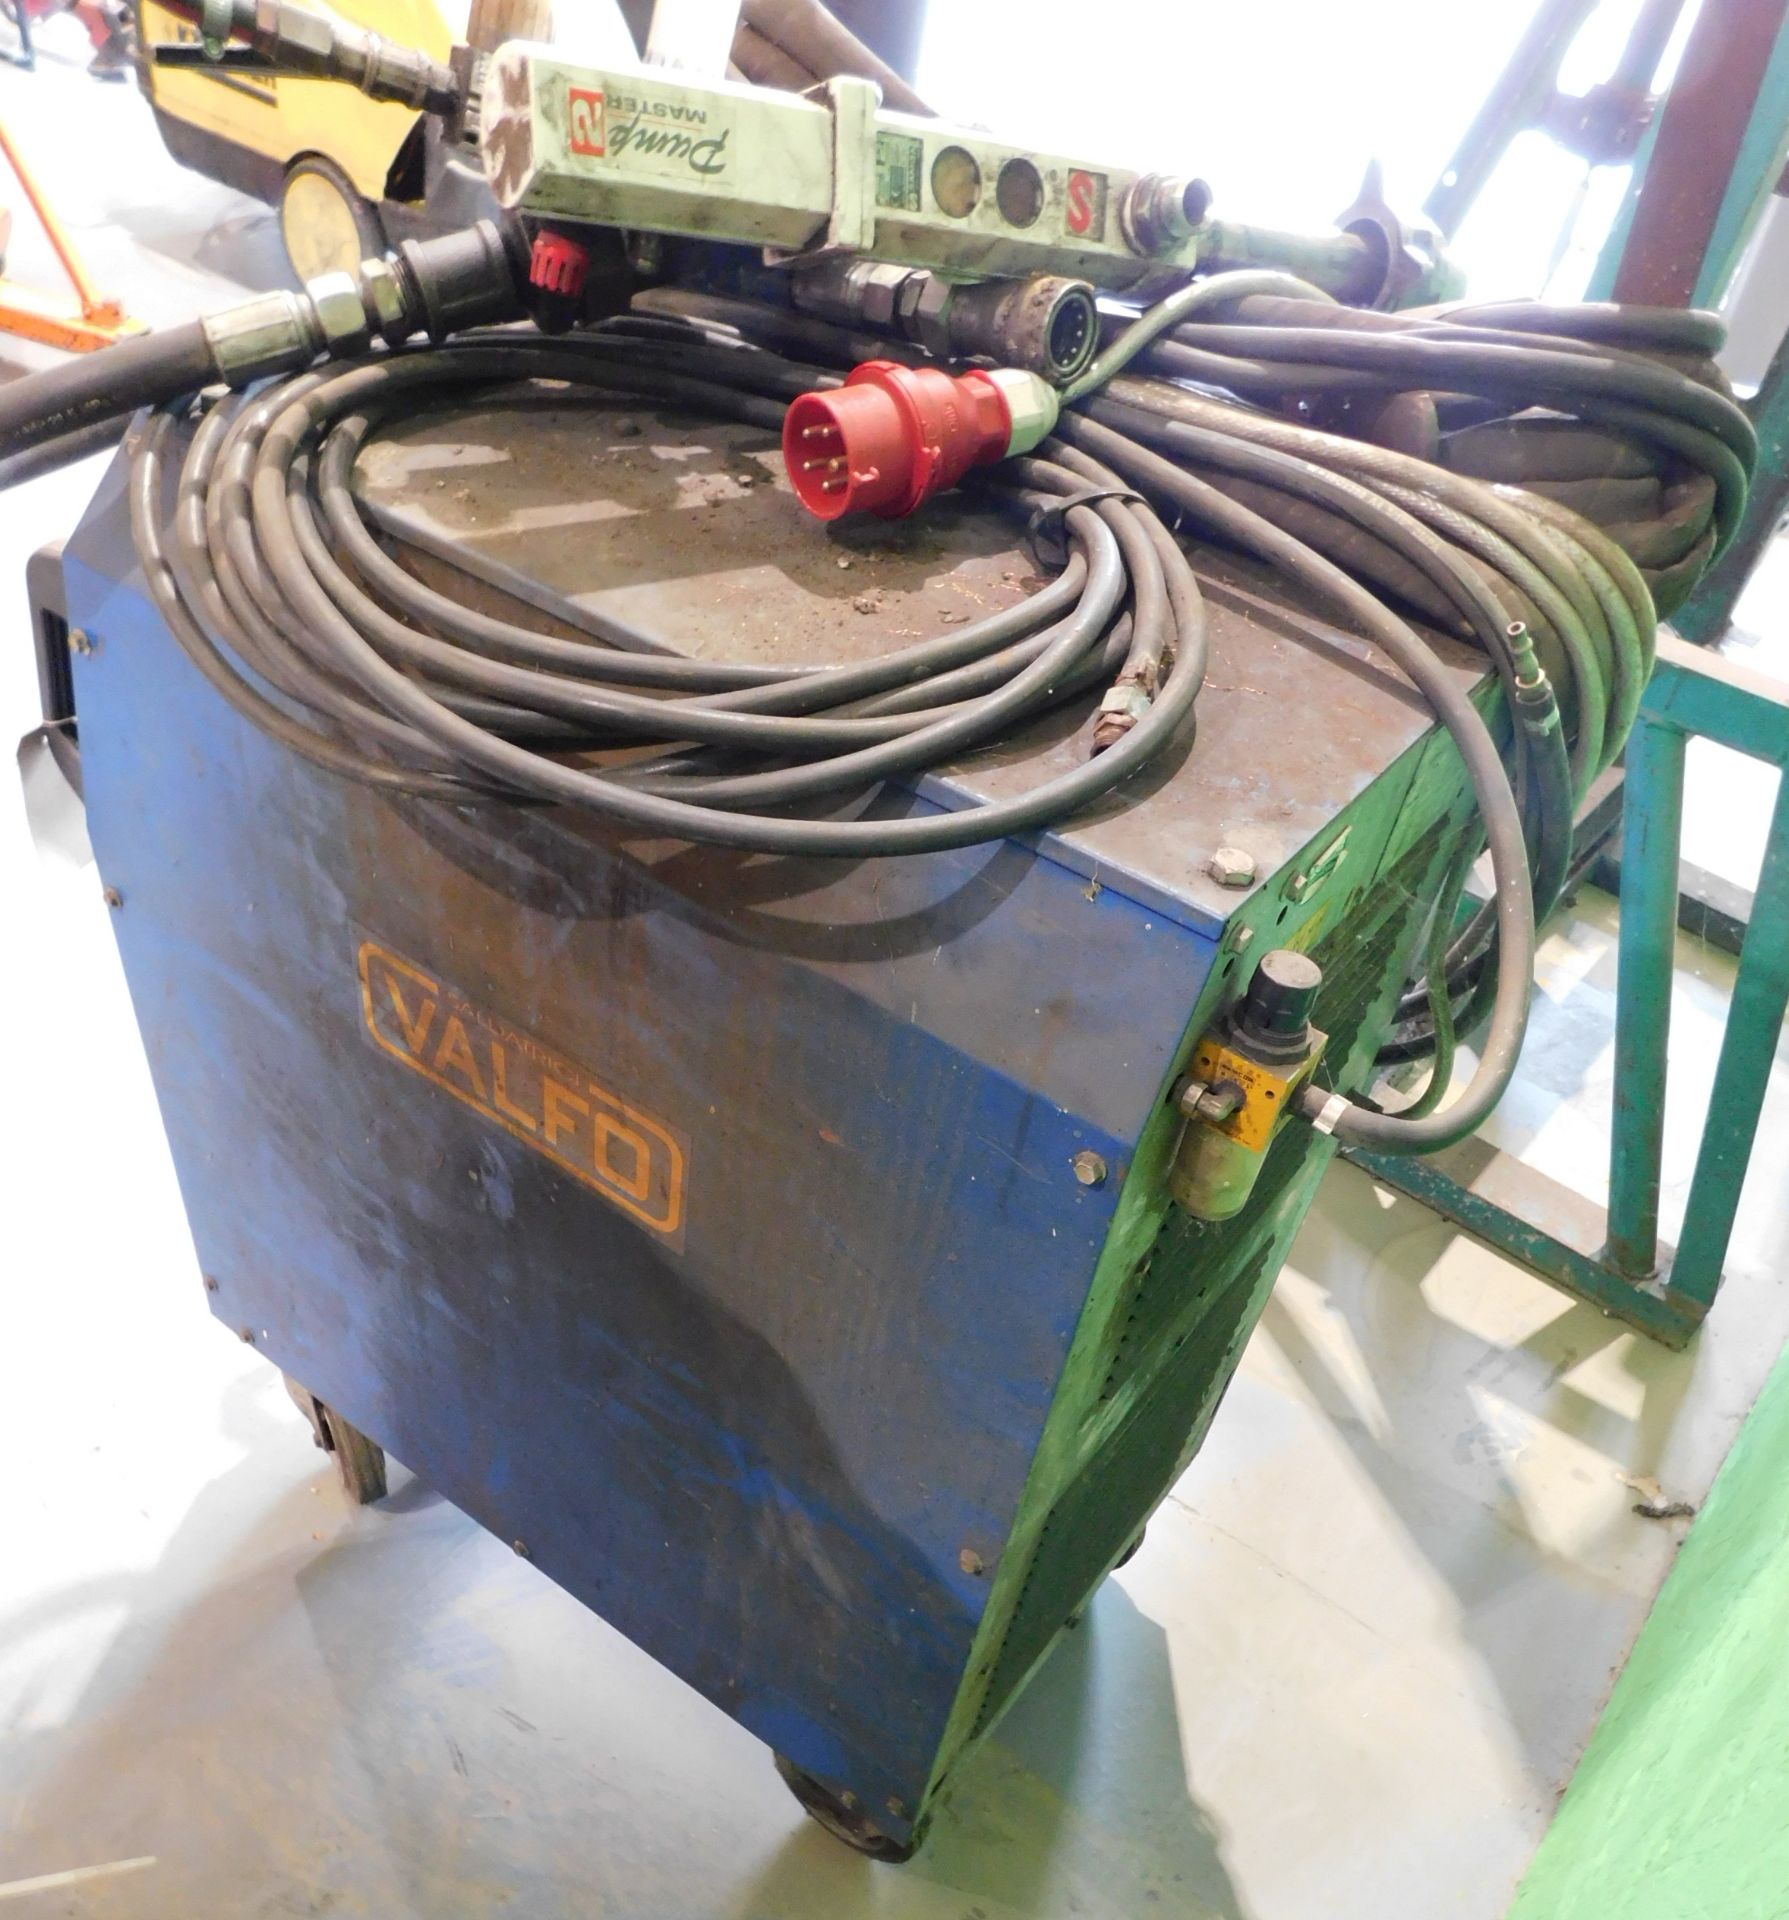 Valfo 60-120 Plasma Cutter (Located Rugby. Please Refer to General Notes) - Image 4 of 7